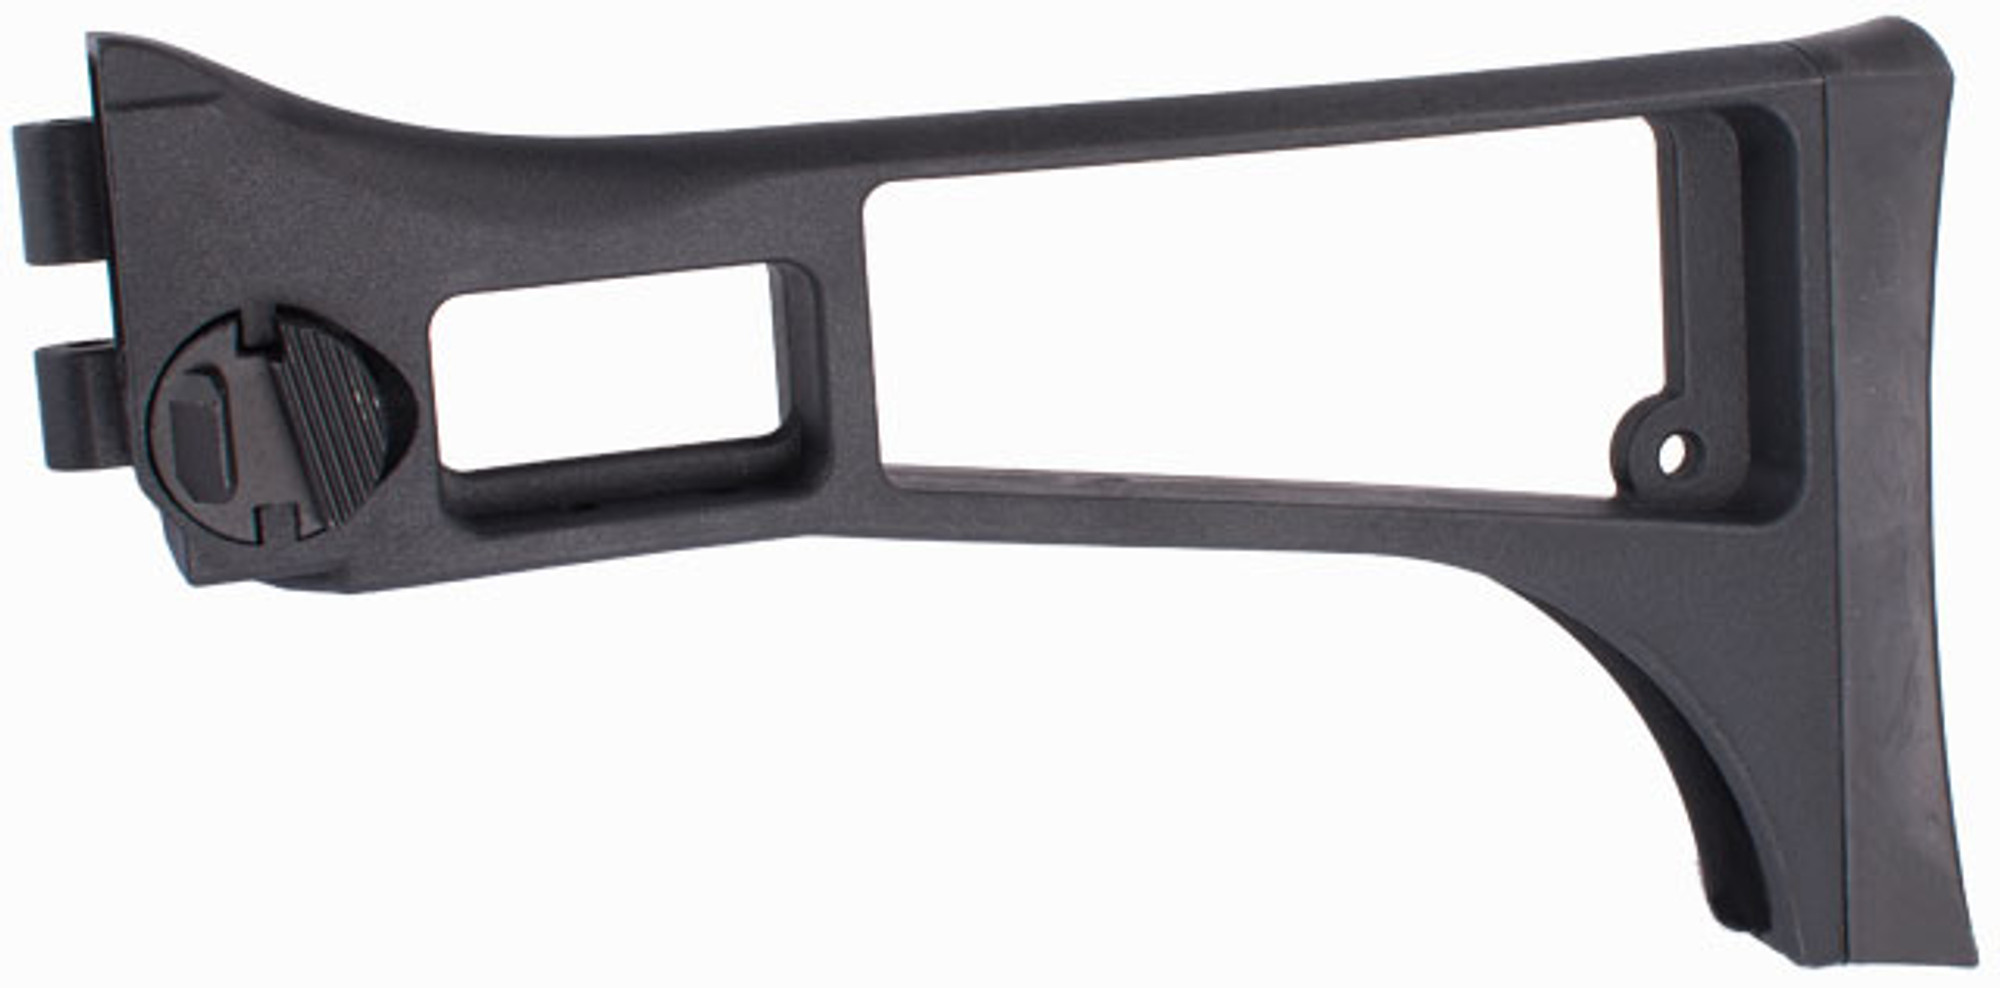 G36K Type Side Folding Stock for G36 Series Airsoft AEG Rifles